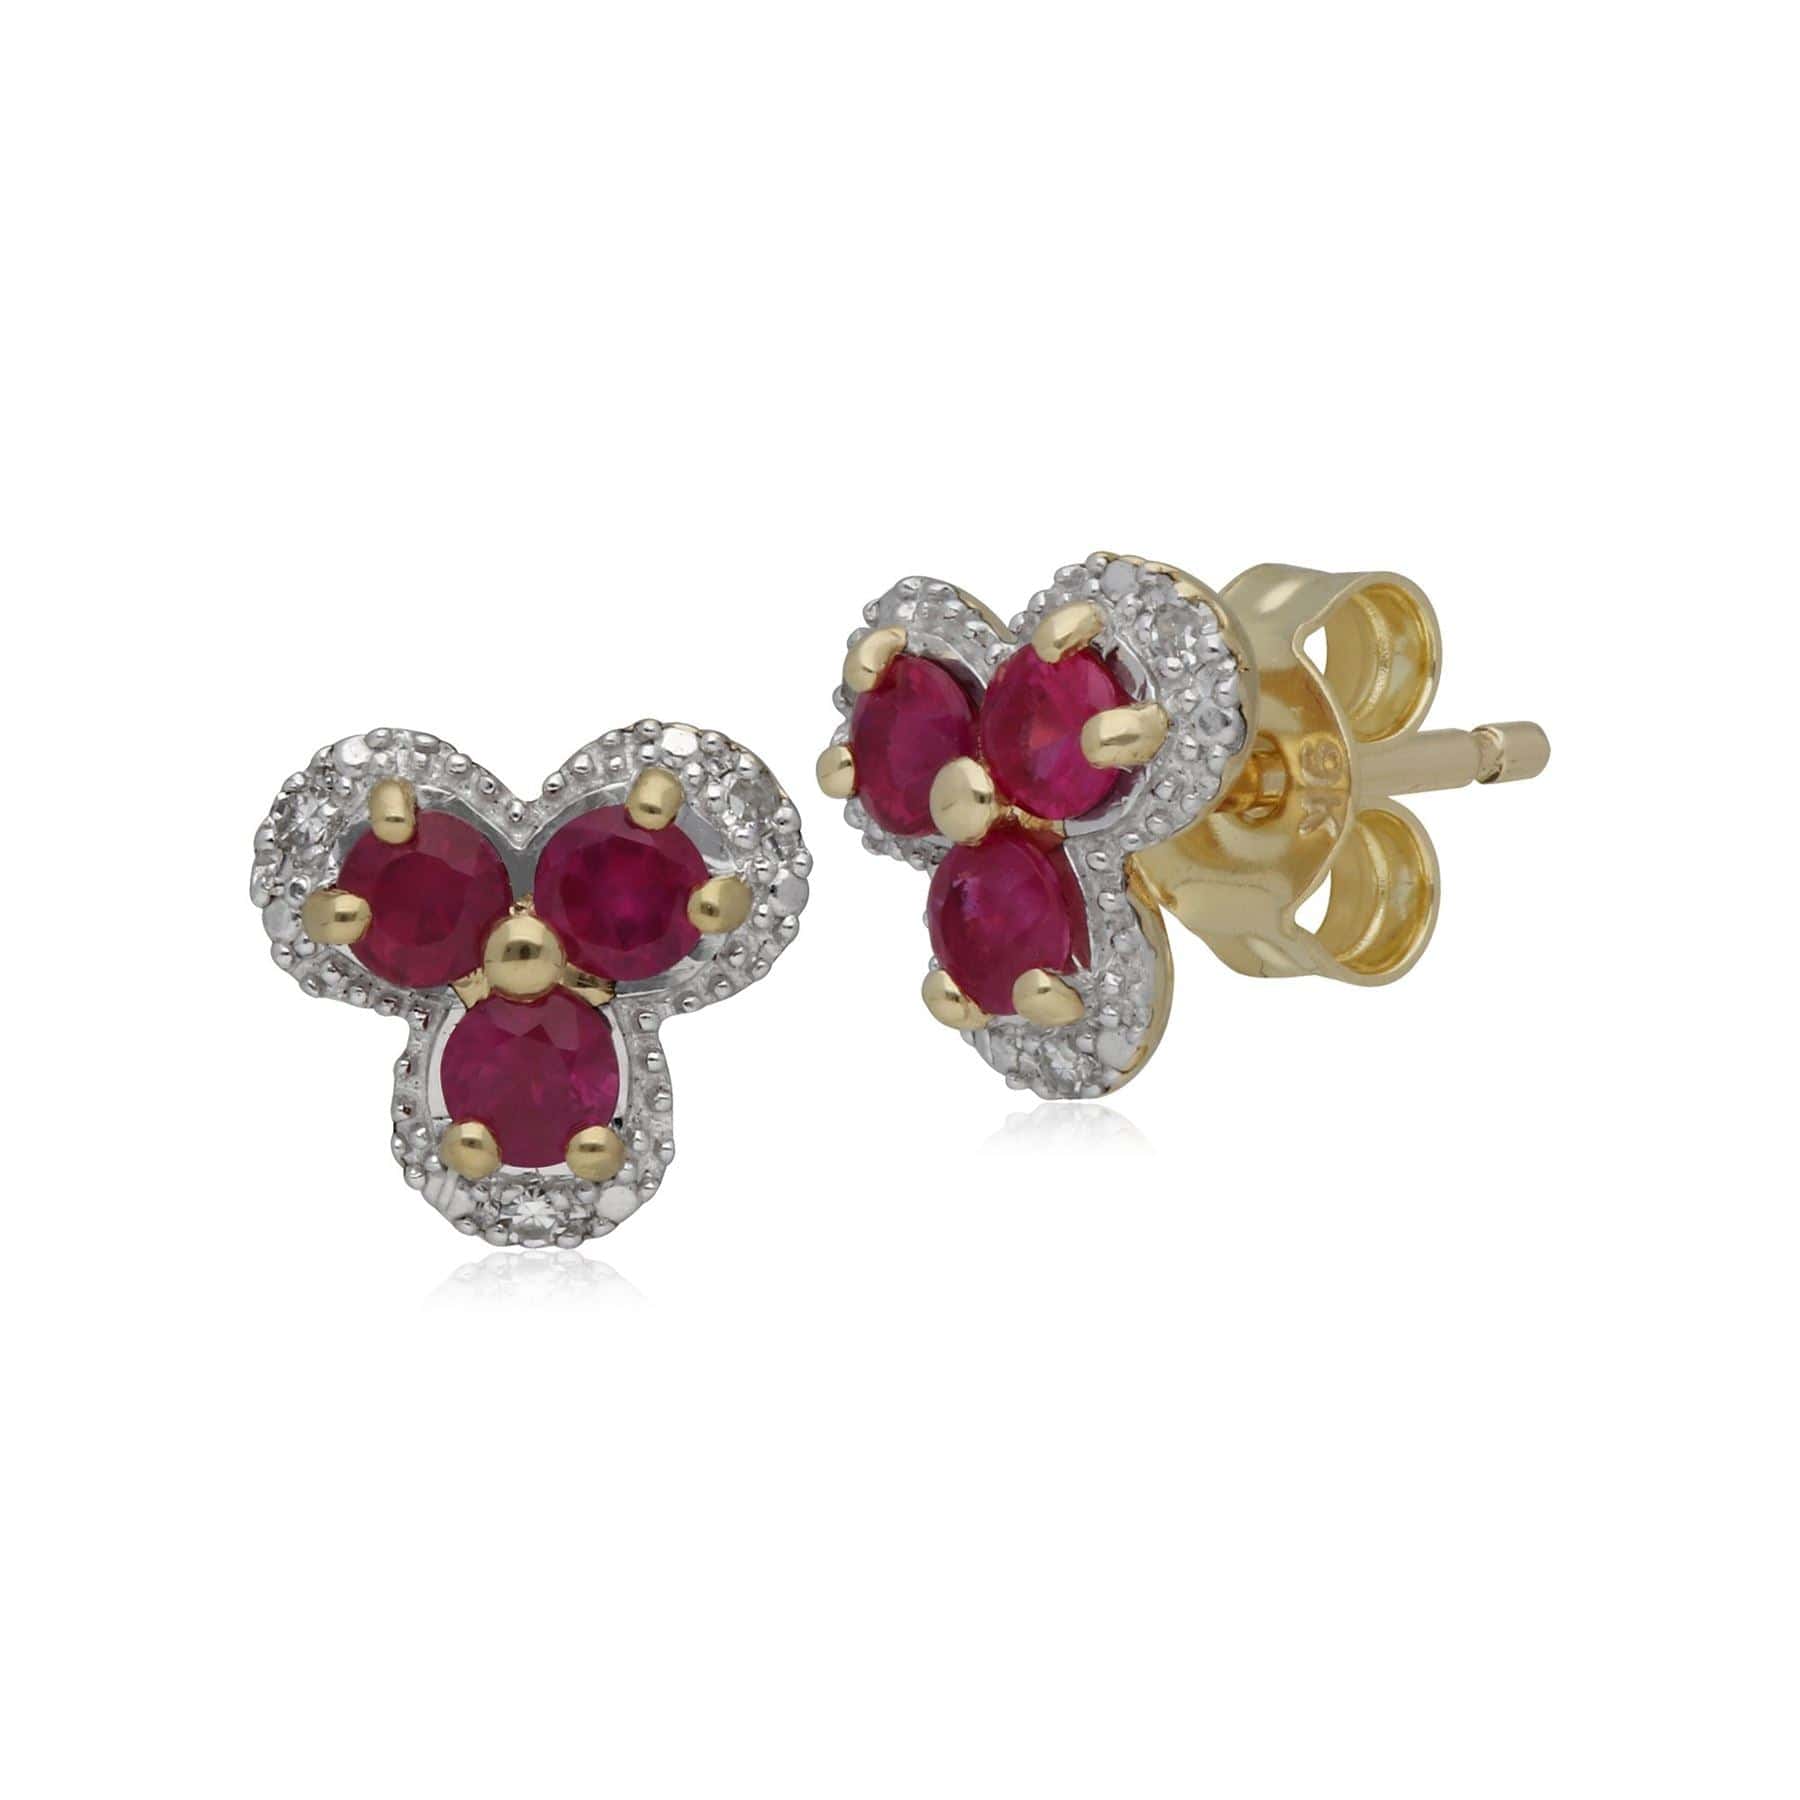 183E1133029 Classic Floral Ruby & Diamond Stud Earrings in 9ct Yellow Gold 1